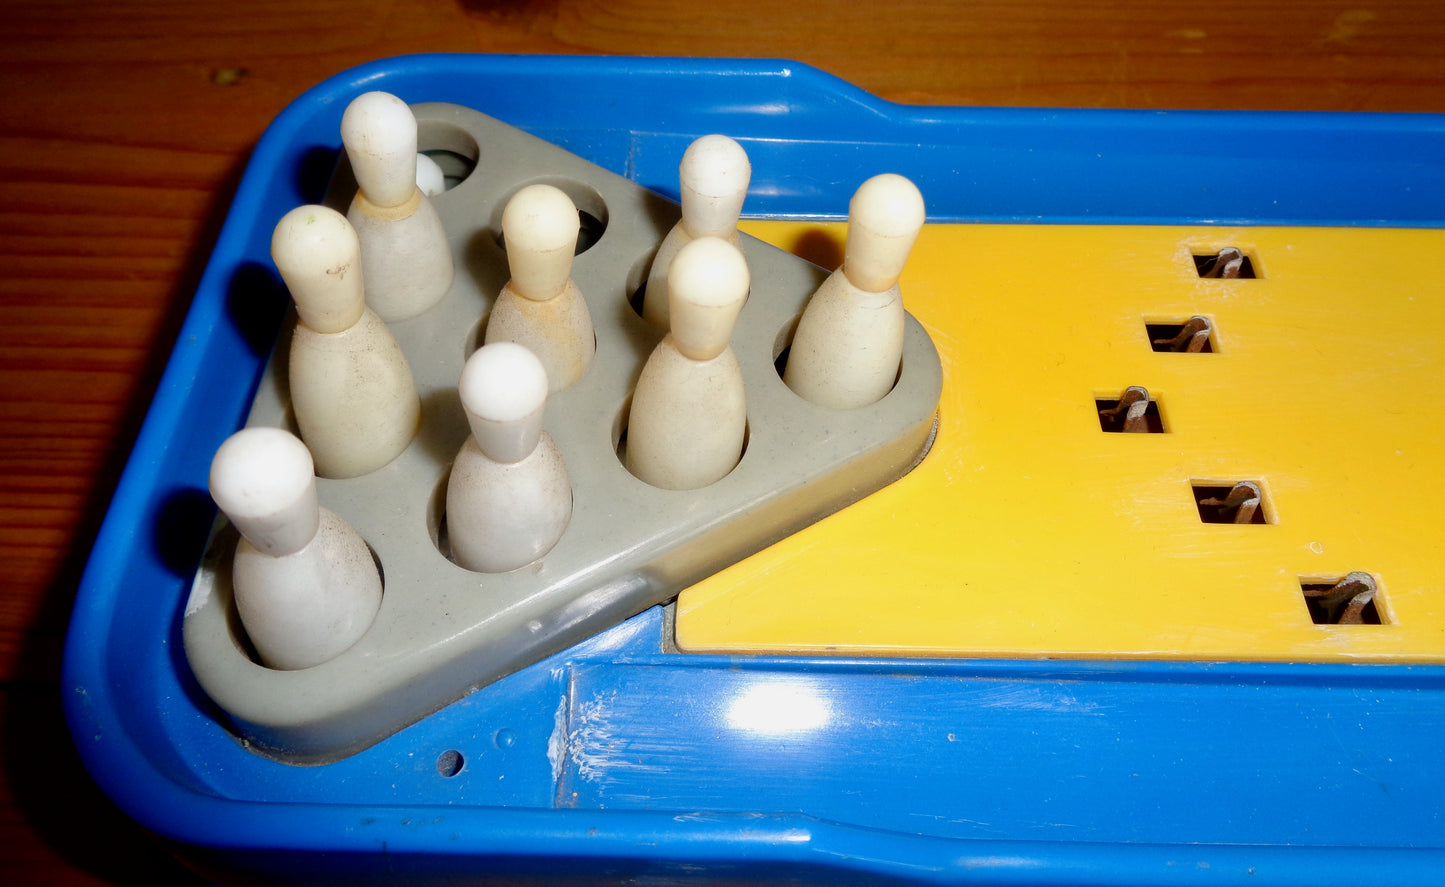 Vintage Tabletop Toy 10-Pin Bowling Game By Tomy